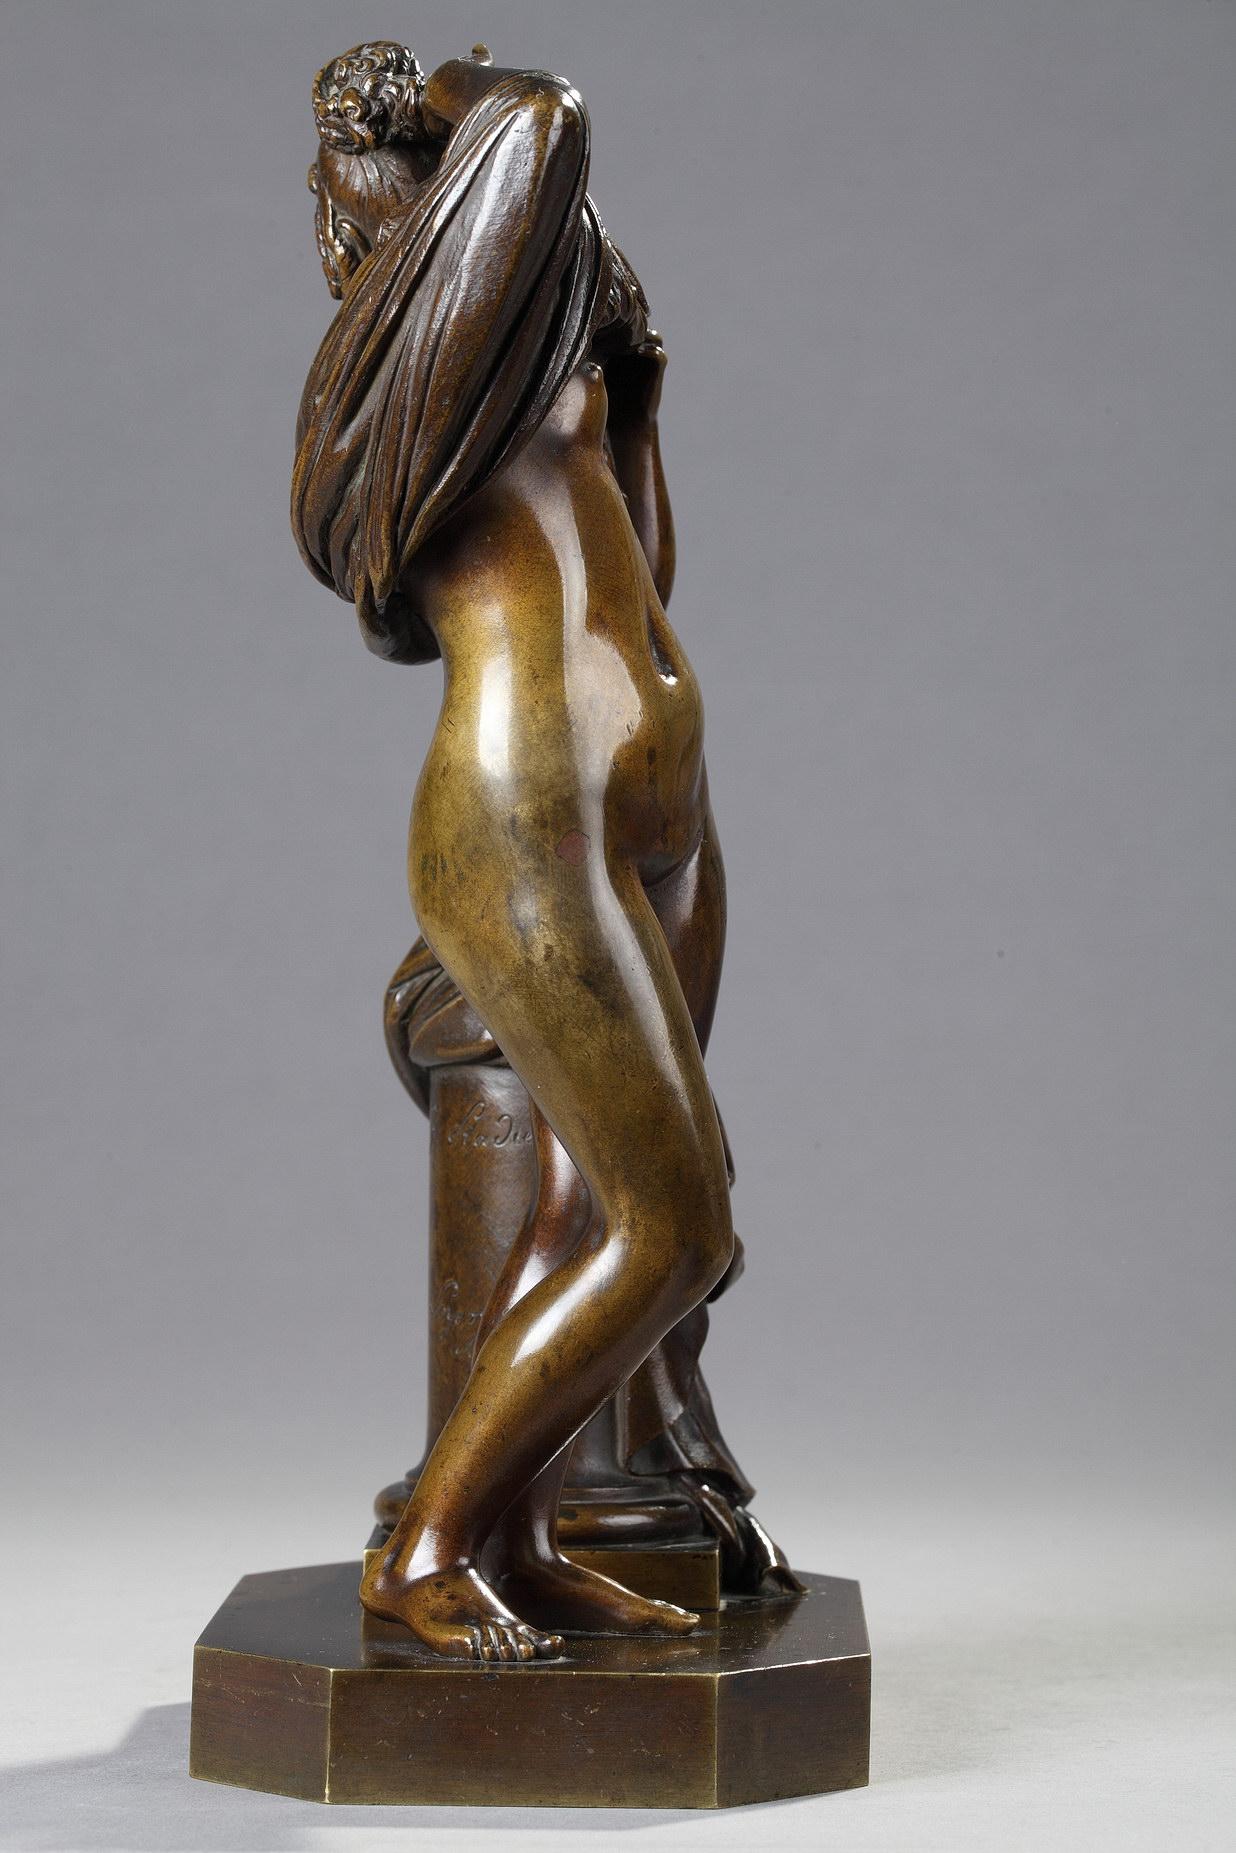 Woman taking off her shirt
by James PRADIER (1790-1852)

Bronze with a nuanced brown patina
cast by SOYER and INGE

France
circa 1850
height 28,5 cm

Biography :
Jean-Jacques Pradier, known as James Pradier (1790-1852) was a sculptor and painter